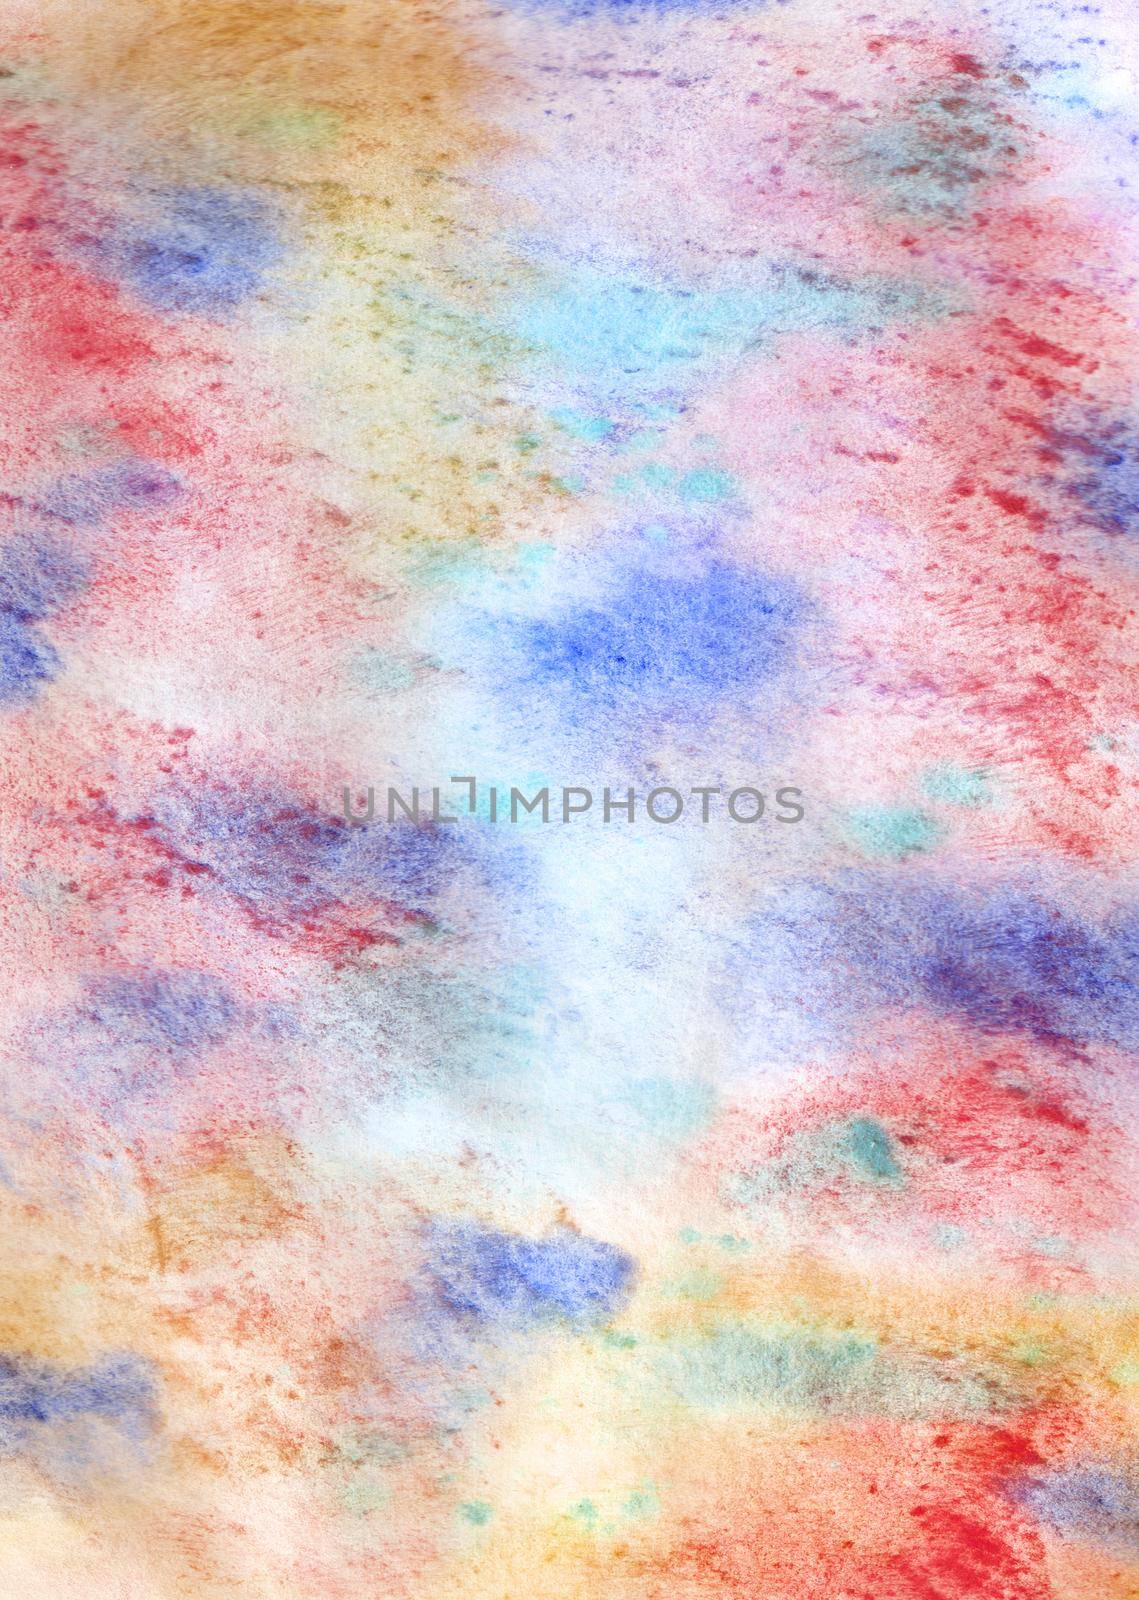 Color abstract watercolor background with texture effect and smooth transitions in different colors. Stock illustration for posters, postcards, banners and creative design.
